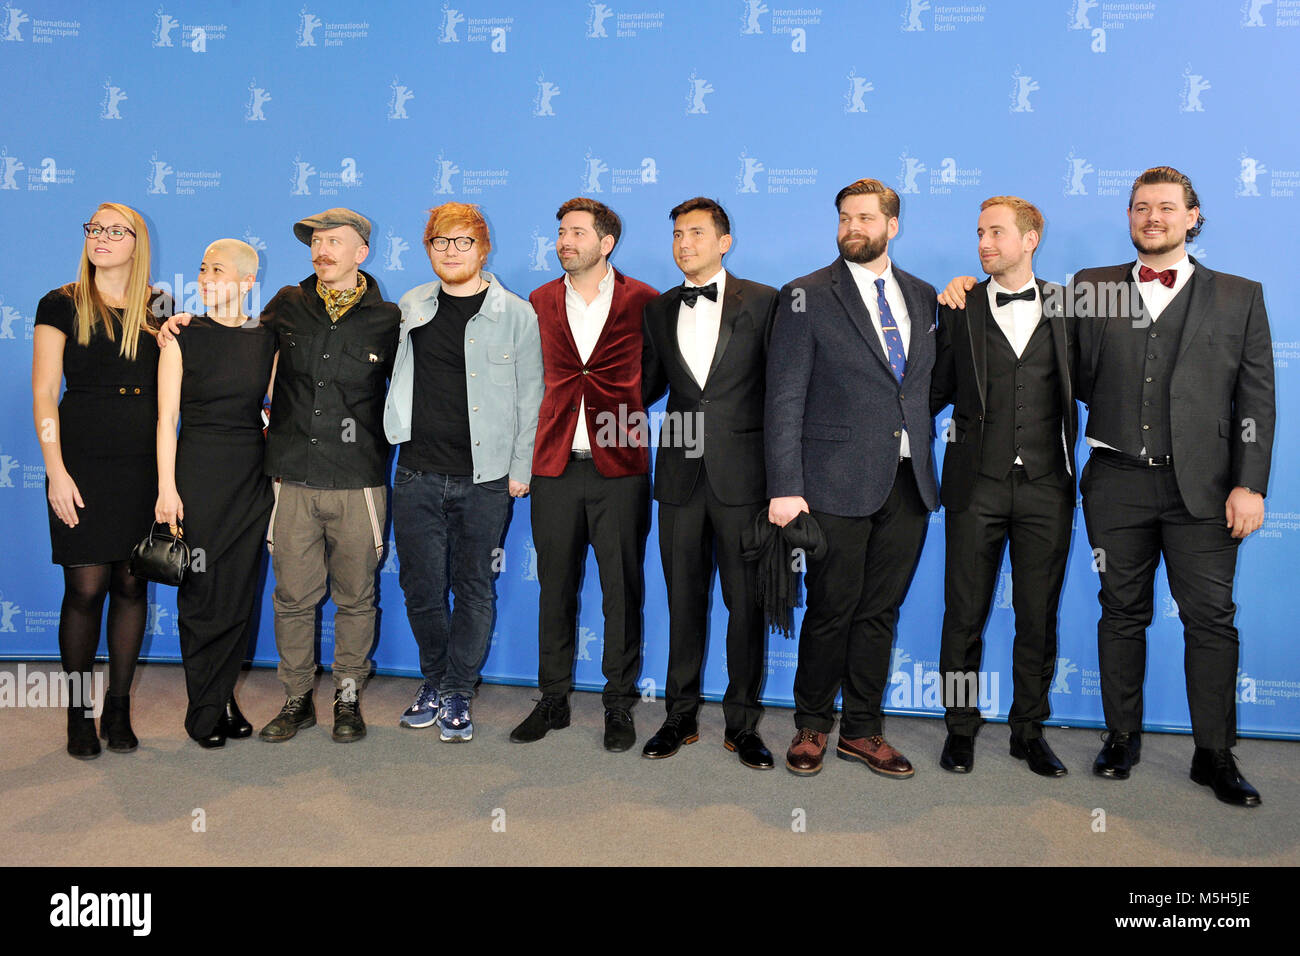 Berlin, Germany. 23rd Feb, 2018. (EDITORS NOTE: Image has been digitally retouched) l.t.r: Maleri Sevier, Kimmie Kim, Foy Vance, Ed Sheeran, Murray Cummings, Alejandro Reyes-Knight, Ben Wainwright-Pearce, Billy Cummings and William Bean photographed at the 'Songwriter' photo call during the 68th Berlin Film Festival at the Grand Hyatt Hotel on February 23, 2018 in Berlin, Germany. Credit: John Rasimus/Media Punch ***France, Sweden, Norway, Denark, Finland, Usa, Czech Republic, South America Only***/Alamy Live News Stock Photo